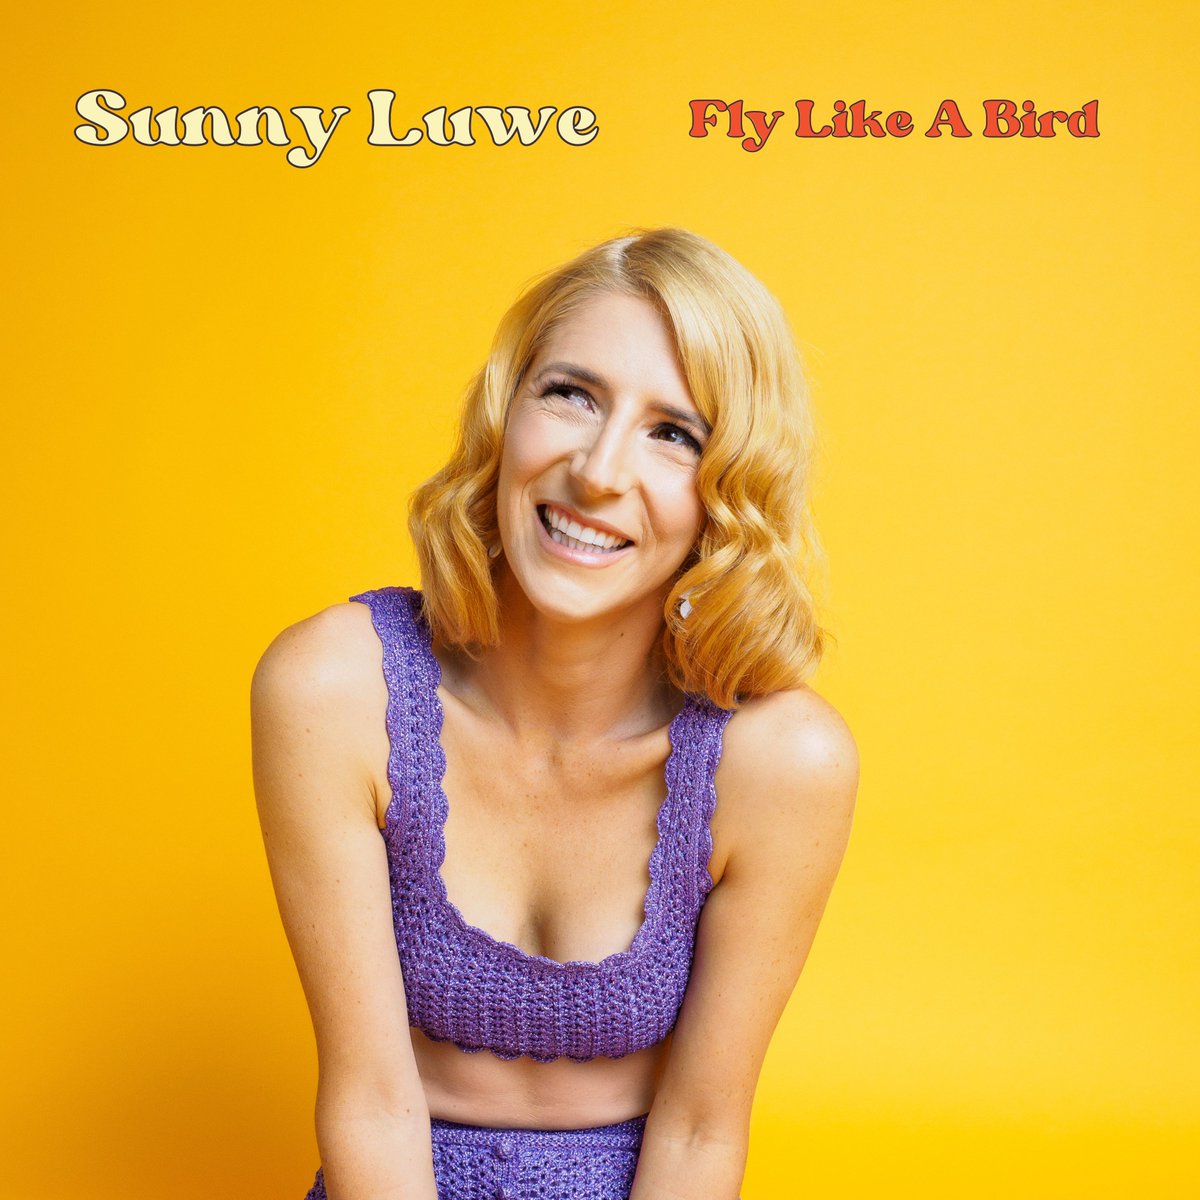 #np 'Fly Like a Bird' by Gold Coast singer-songwriter @SunnyLuwe on Australia's LGBTIQA+ radio station, @JOY949 - her light-filled new song